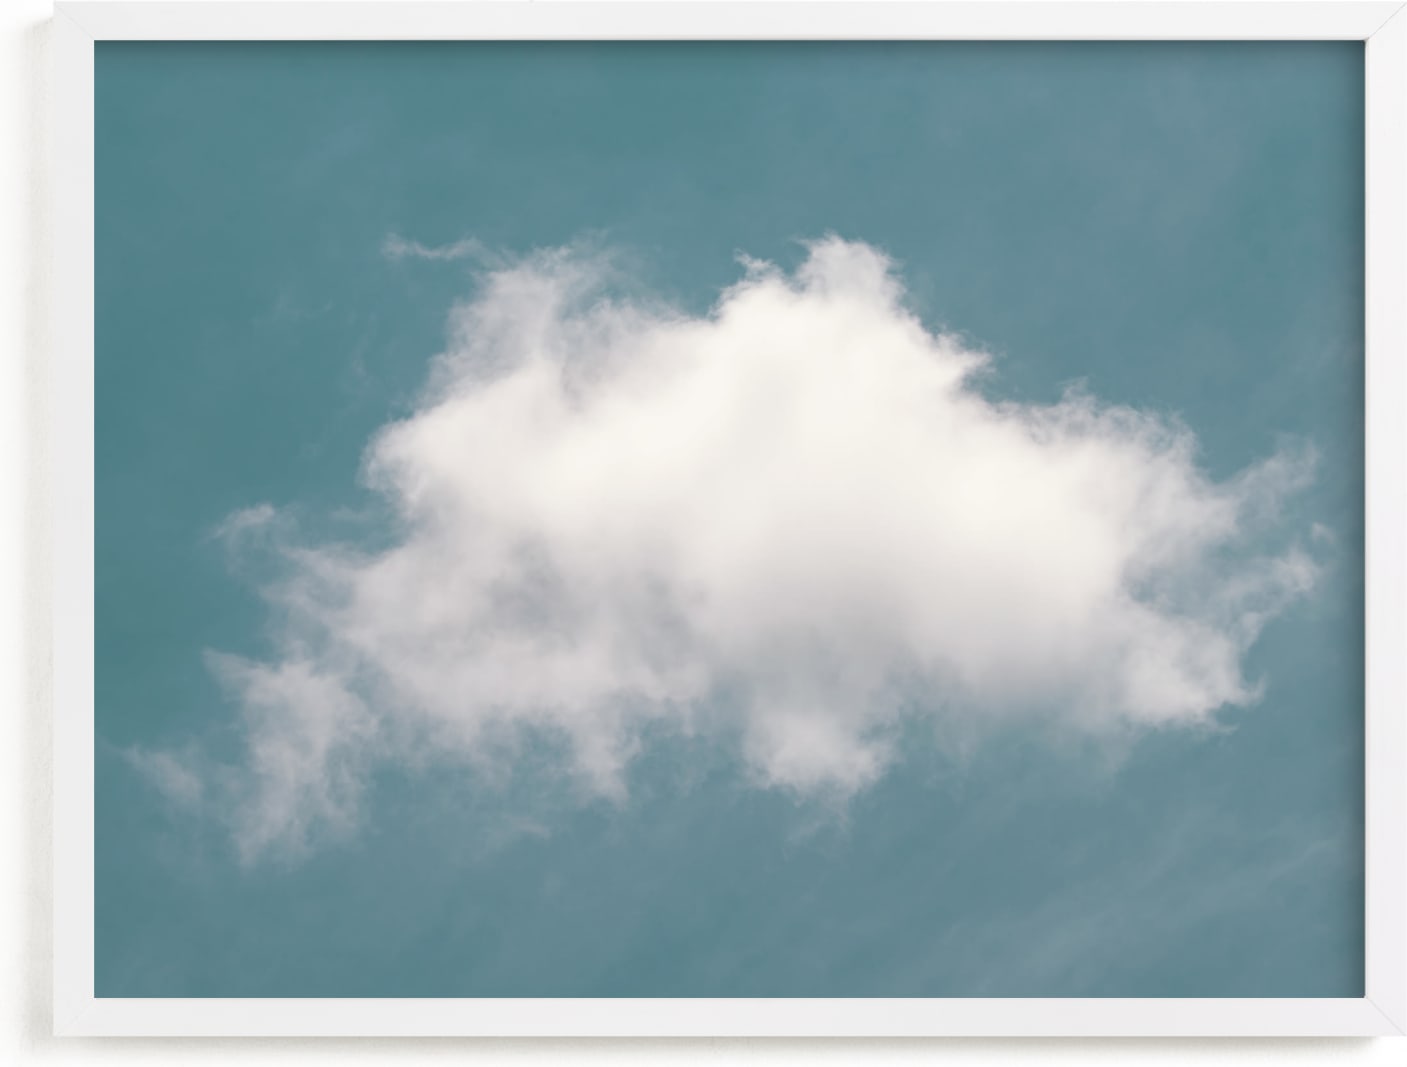 This is a blue, white art by Tania Medeiros called Cloud in the Sky.